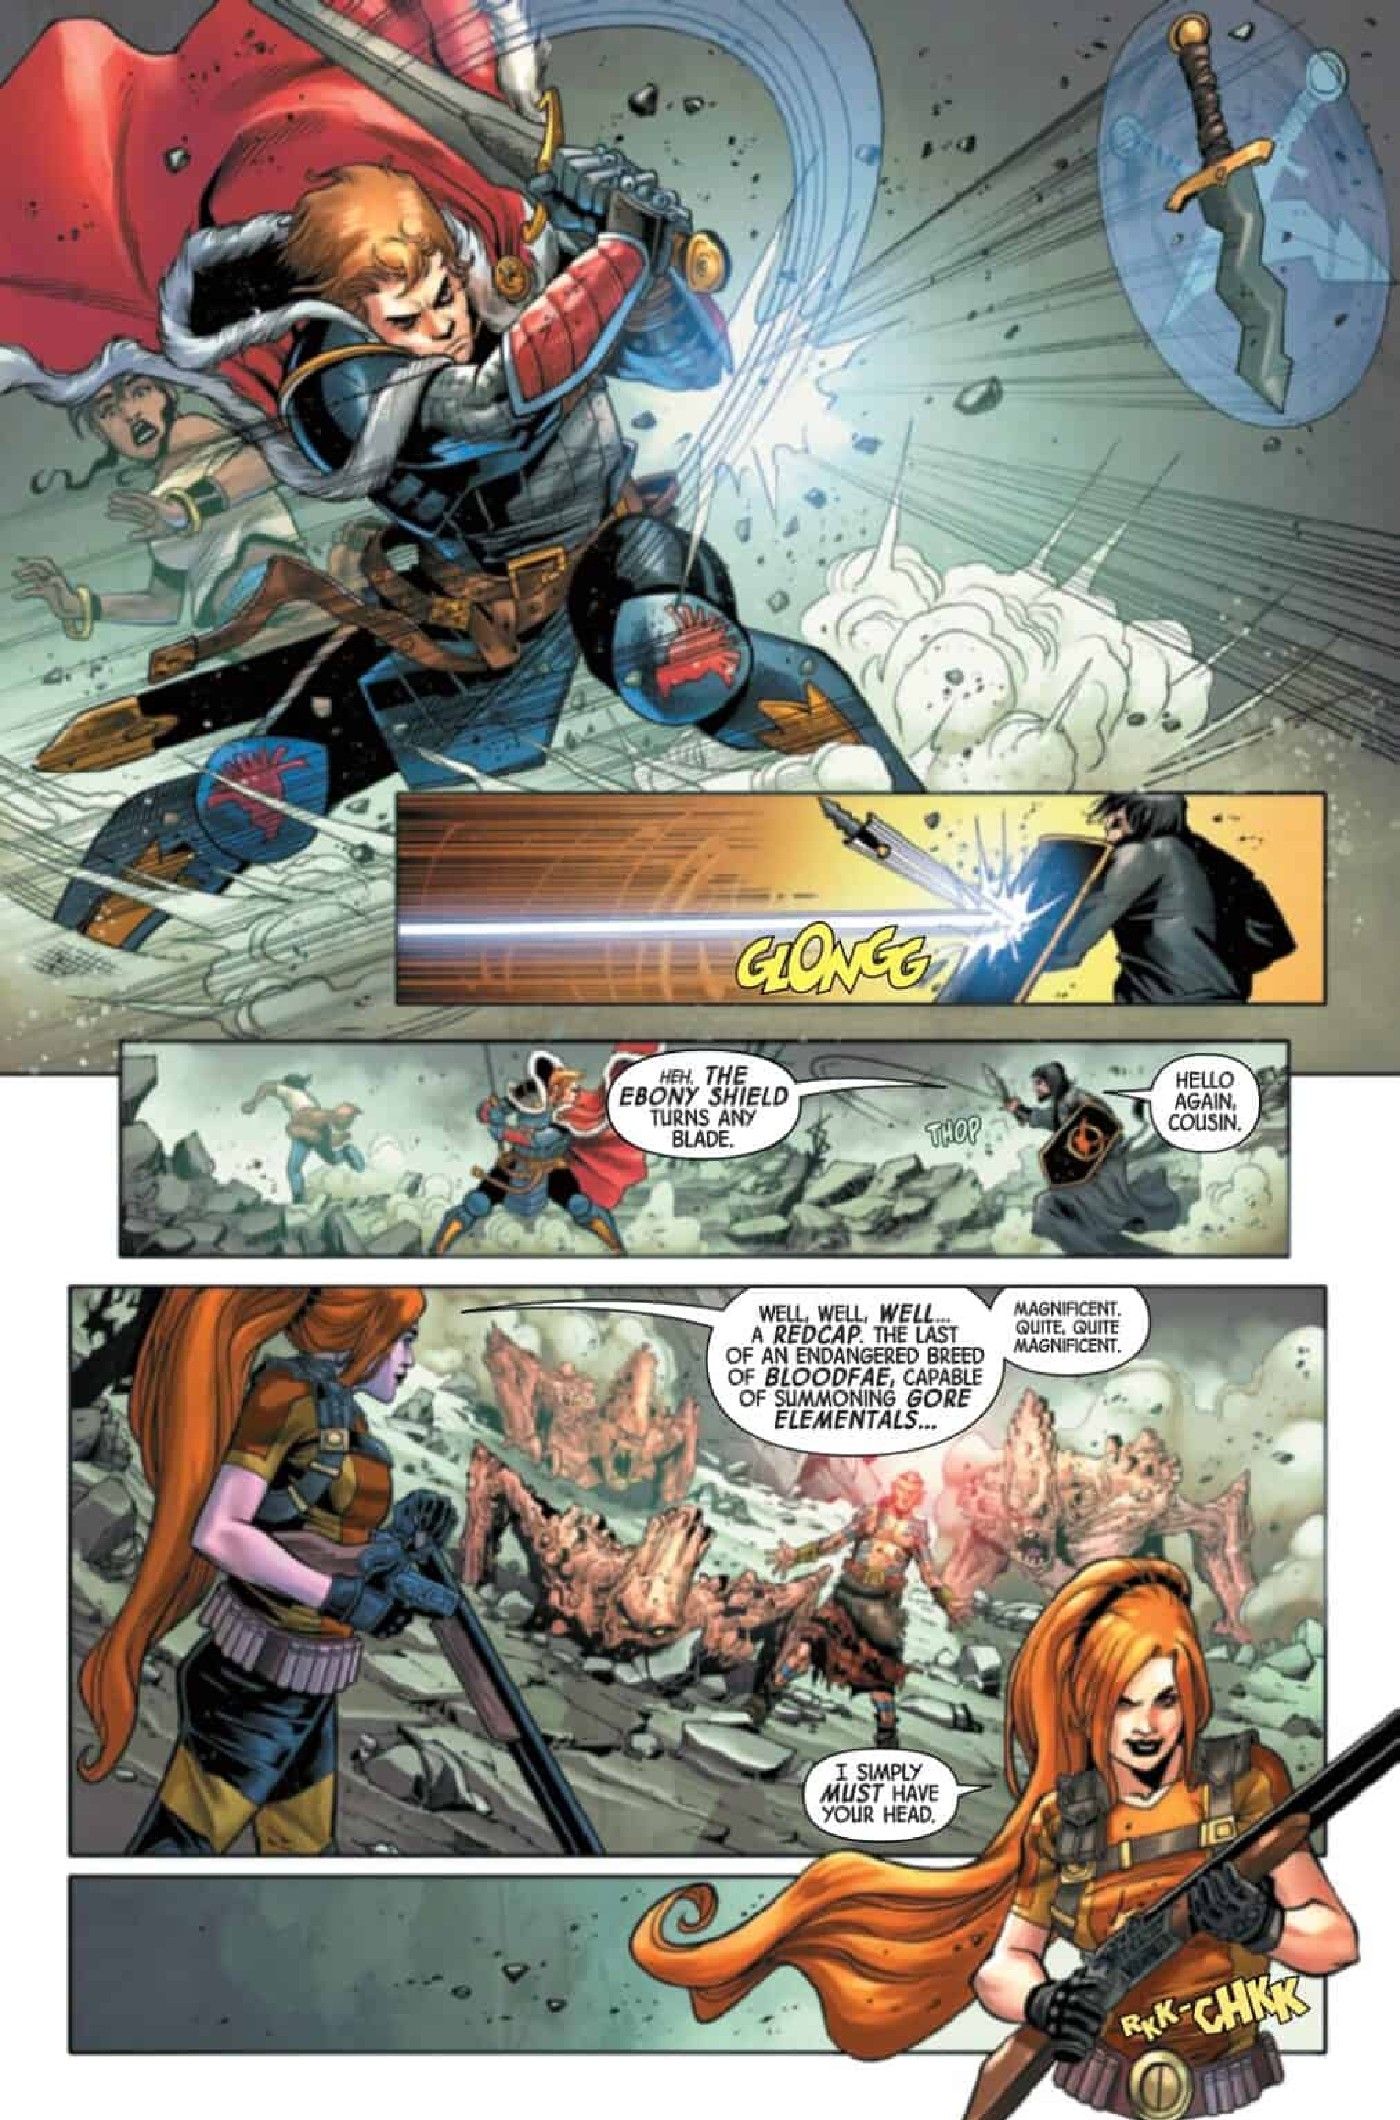 Black Knight Curse of the Ebony Blade preview page 4